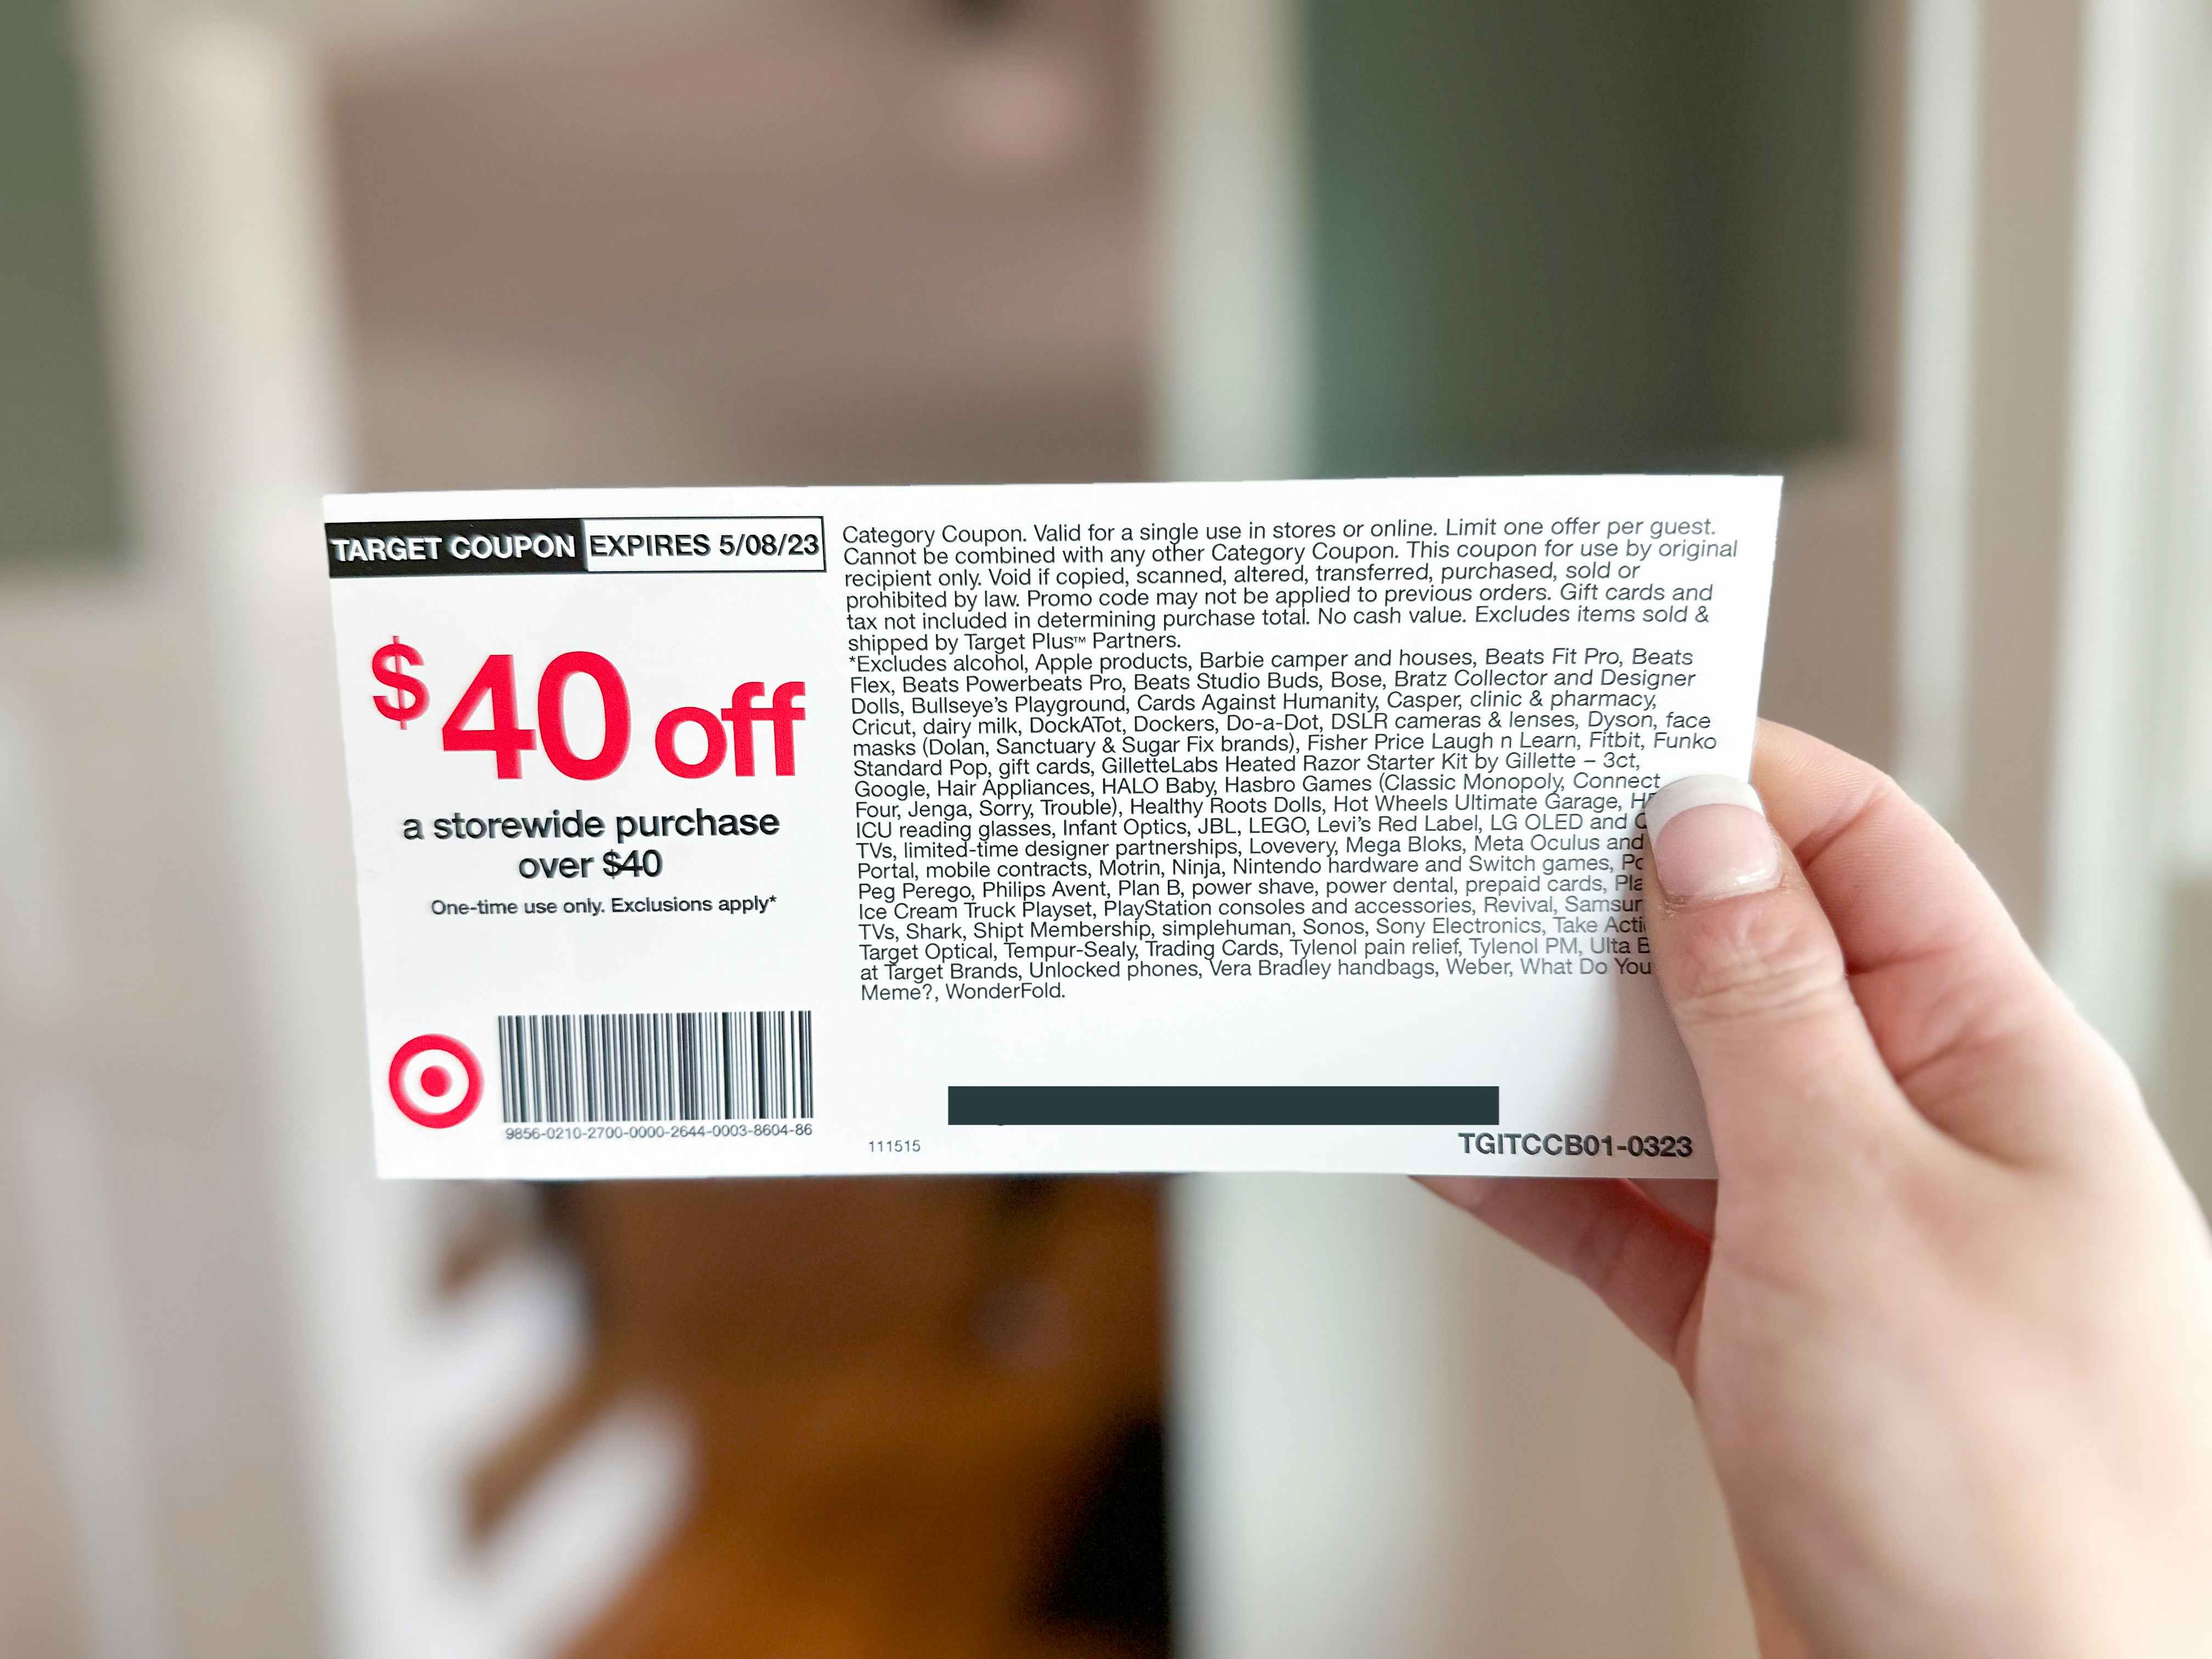 How To Coupon at Target (The Easy Way) - The Krazy Coupon Lady